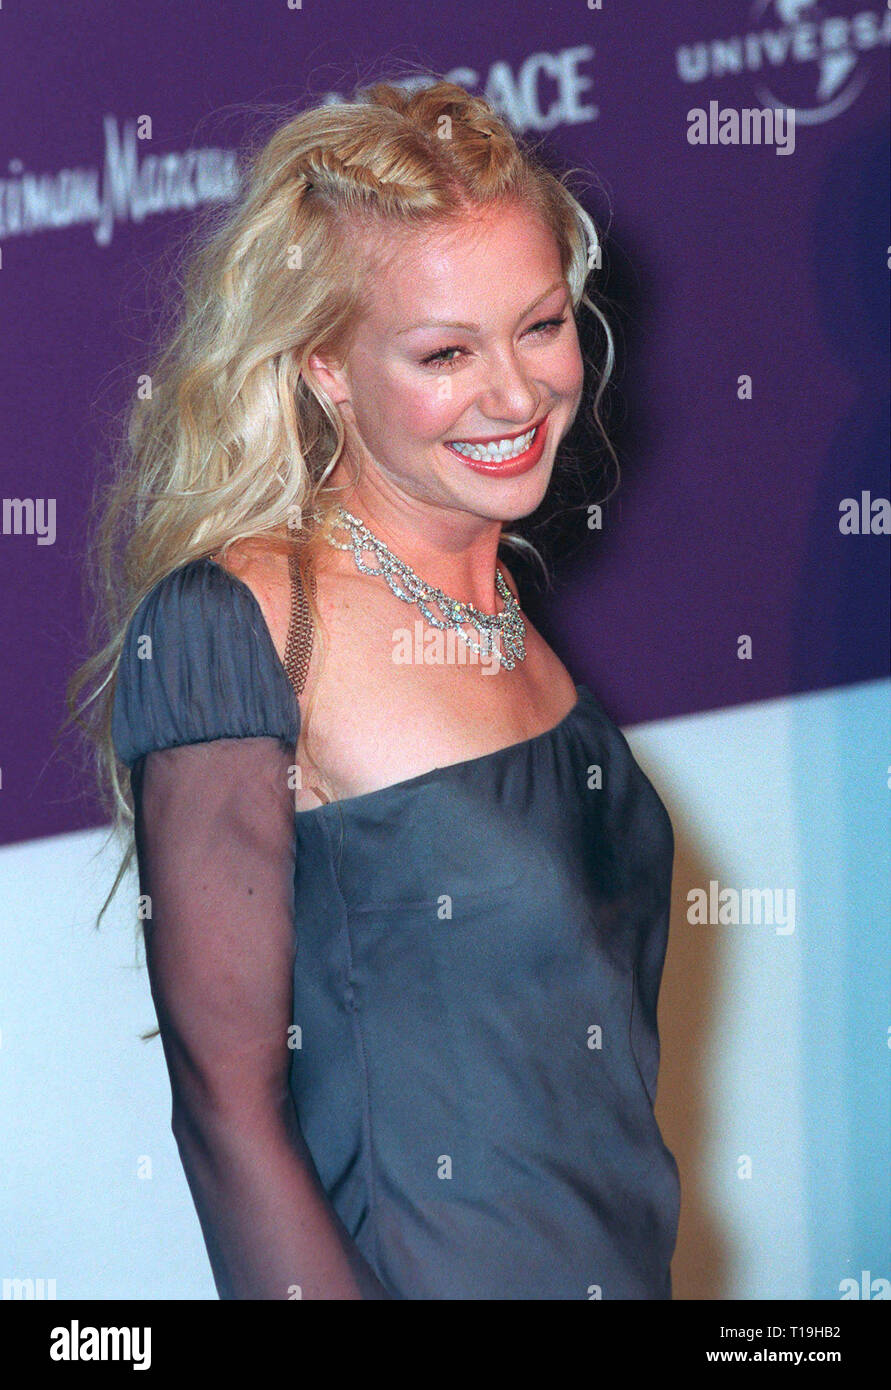 LOS ANGELES, CA - December 10, 1998:  'Ally McBeal' star PORTIA DE ROSSI at the 9th Annual Fire & Ice Ball in Hollywood to benefit the Revlon/UCLA Women's Cancer Research Program.         © Paul Smith / Featureflash Stock Photo